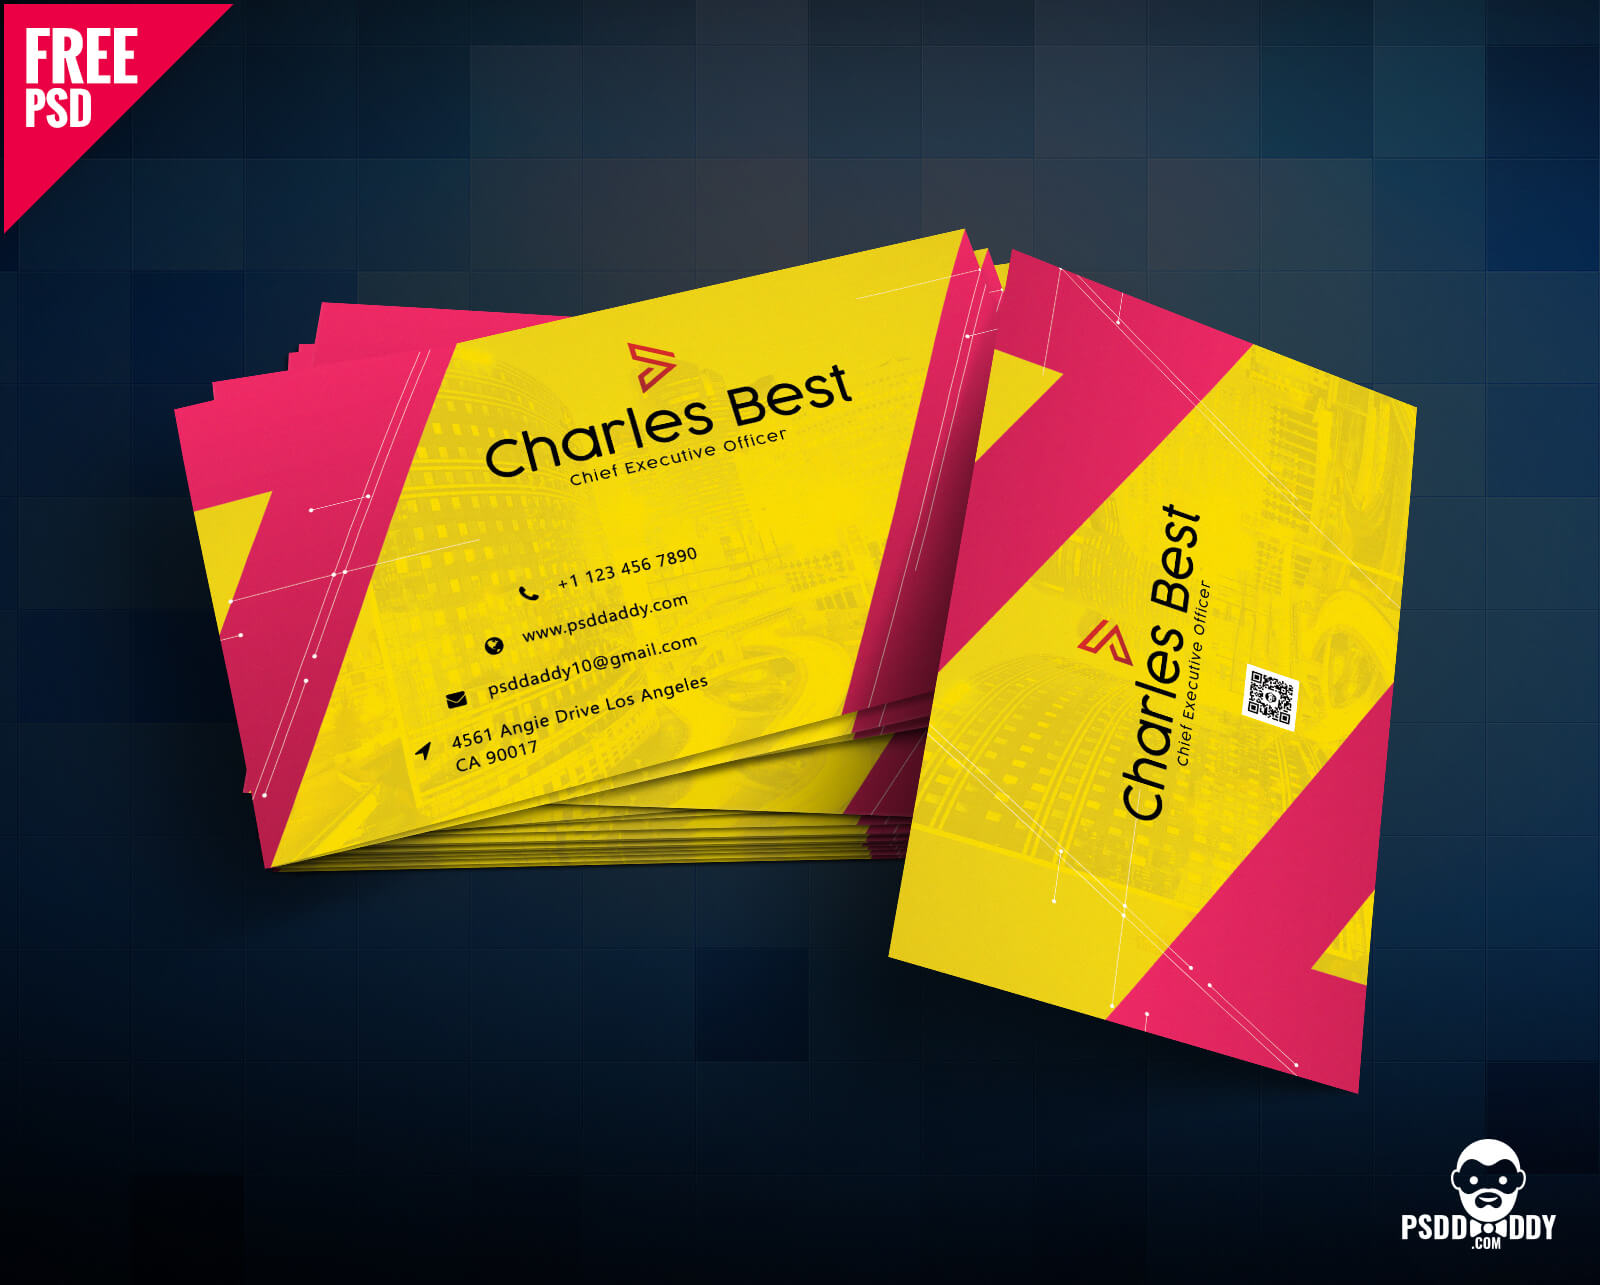 Download] Creative Business Card Free Psd | Psddaddy Throughout Visiting Card Templates Psd Free Download